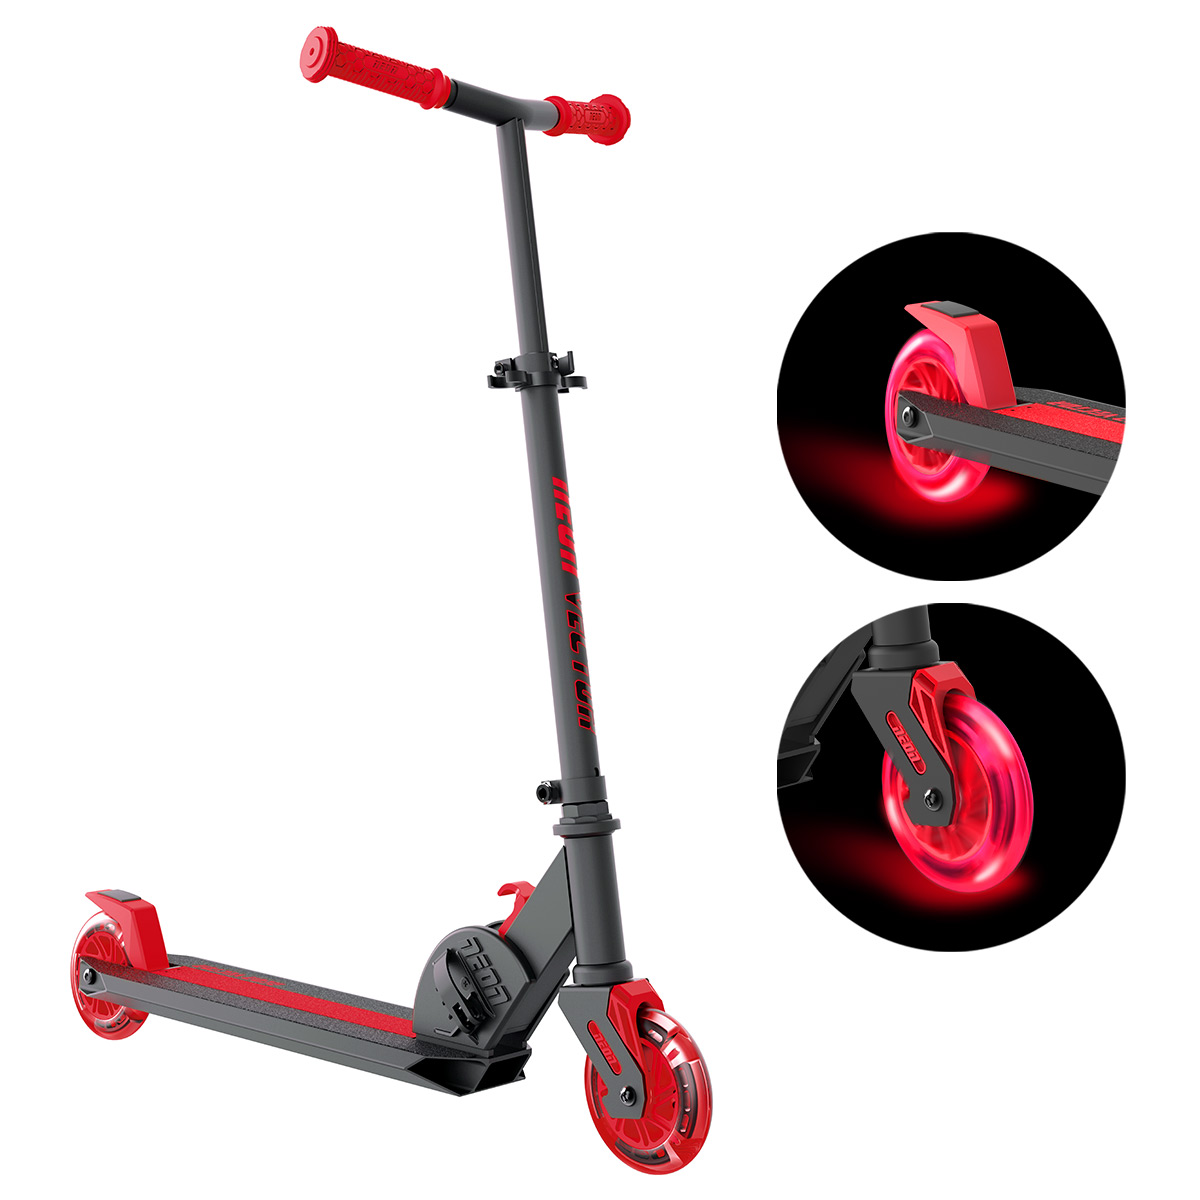 Neon Vector Scooter with LED Ligth Up Wheels Red for Kids Age 5 -12 - image 1 of 6